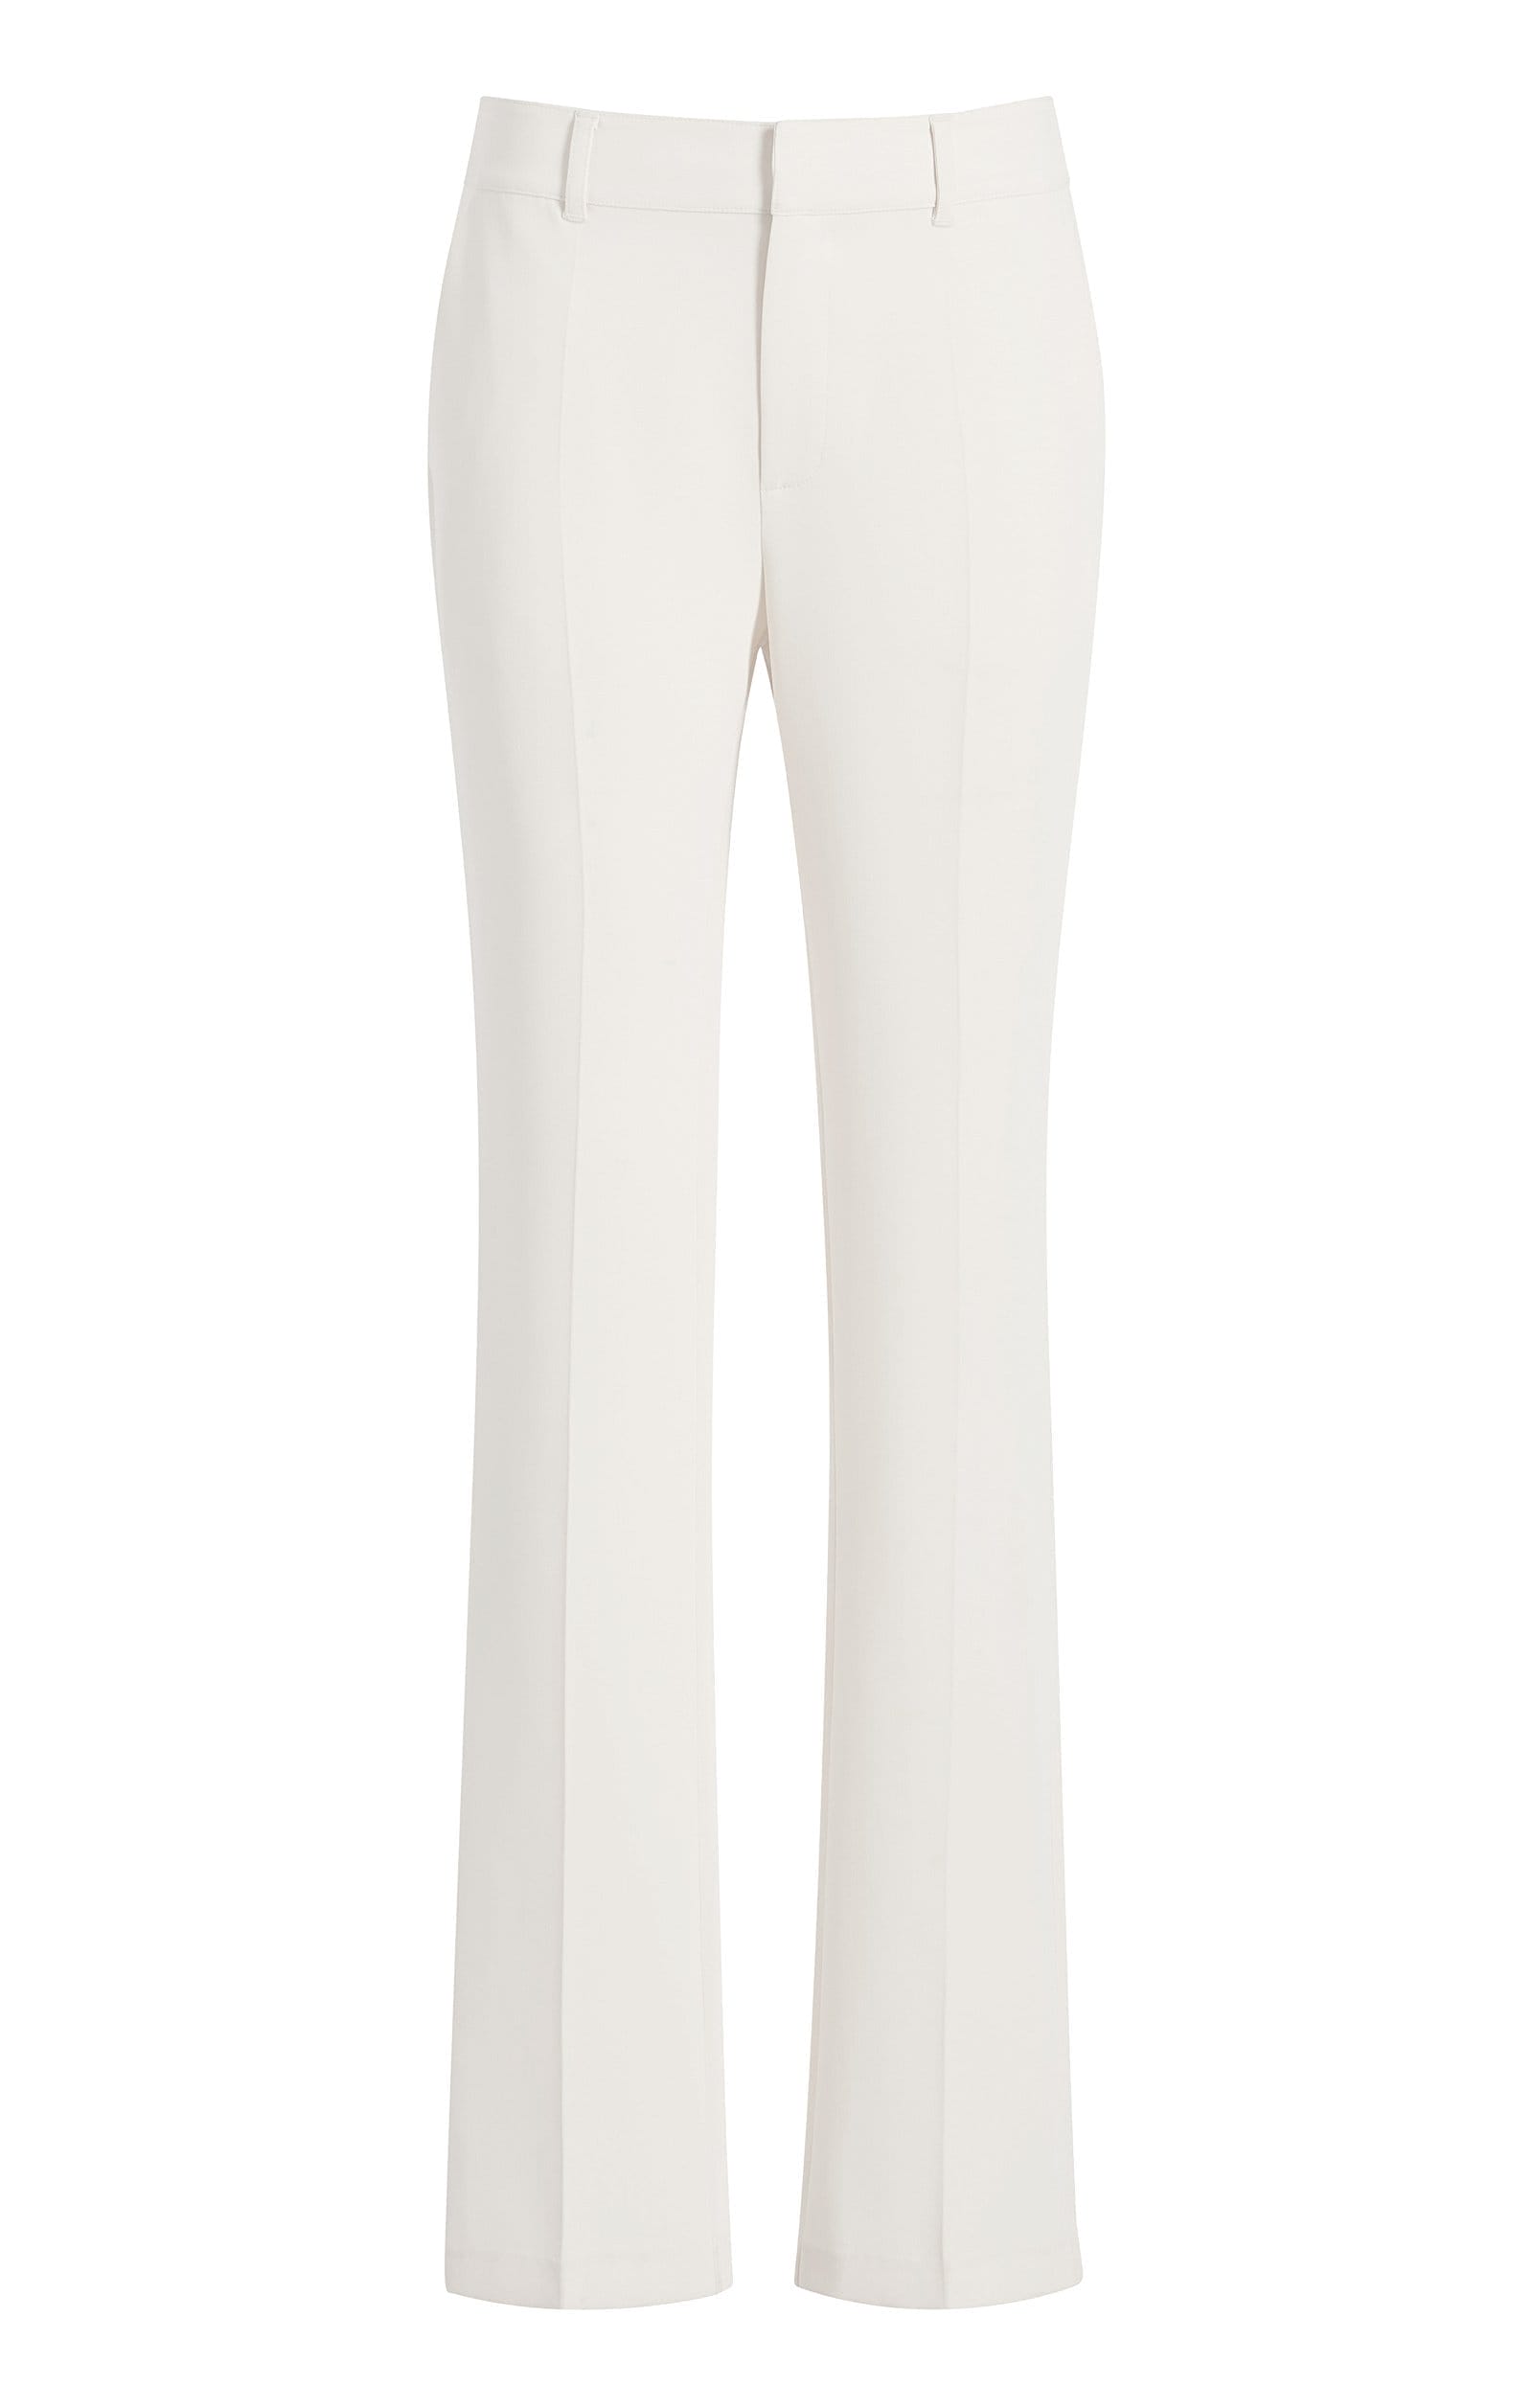 https://cinqasept.nyc/collections/new-arrivals/products/kerry-pant-in-ivory